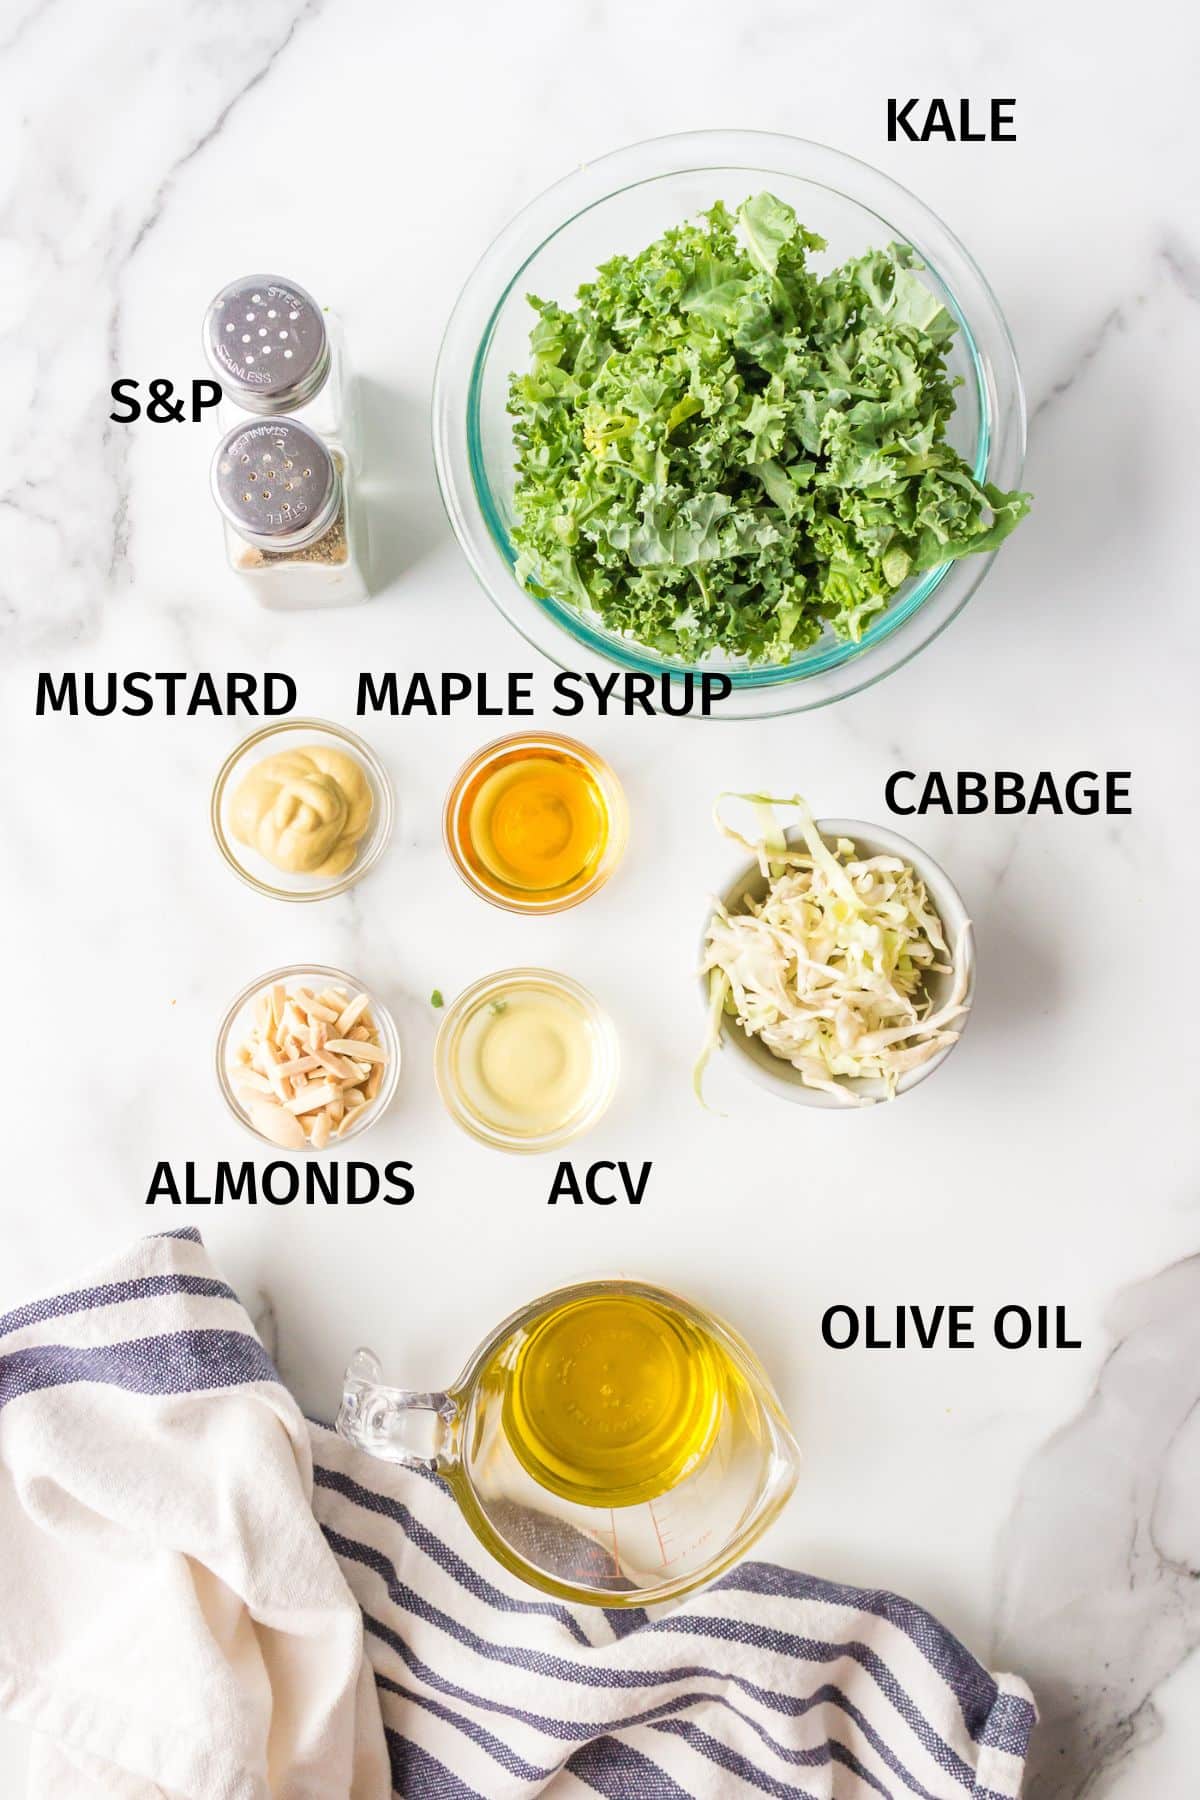 Ingredients to make CFA Kale Salad in bowls on a white surface.